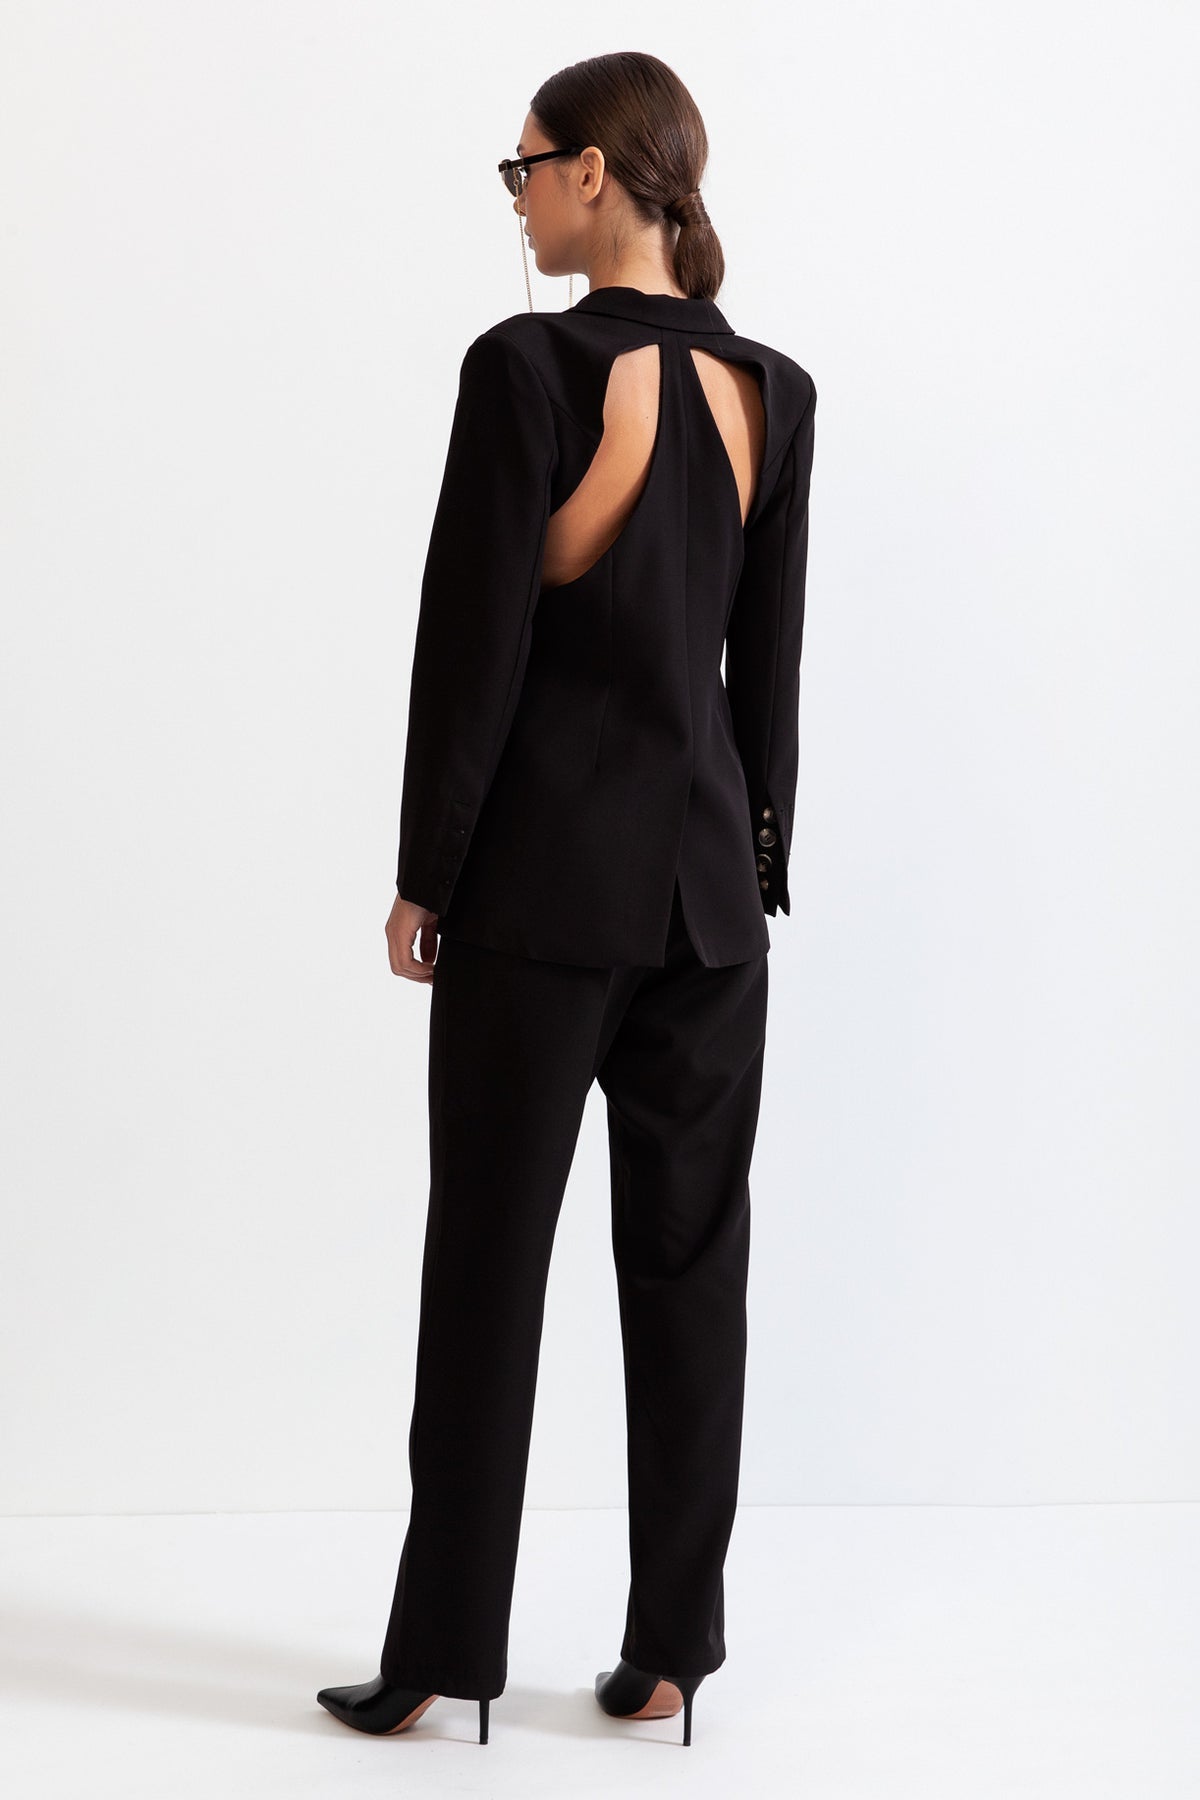 Hanna Hollowed-out Blazer And Pant Suit